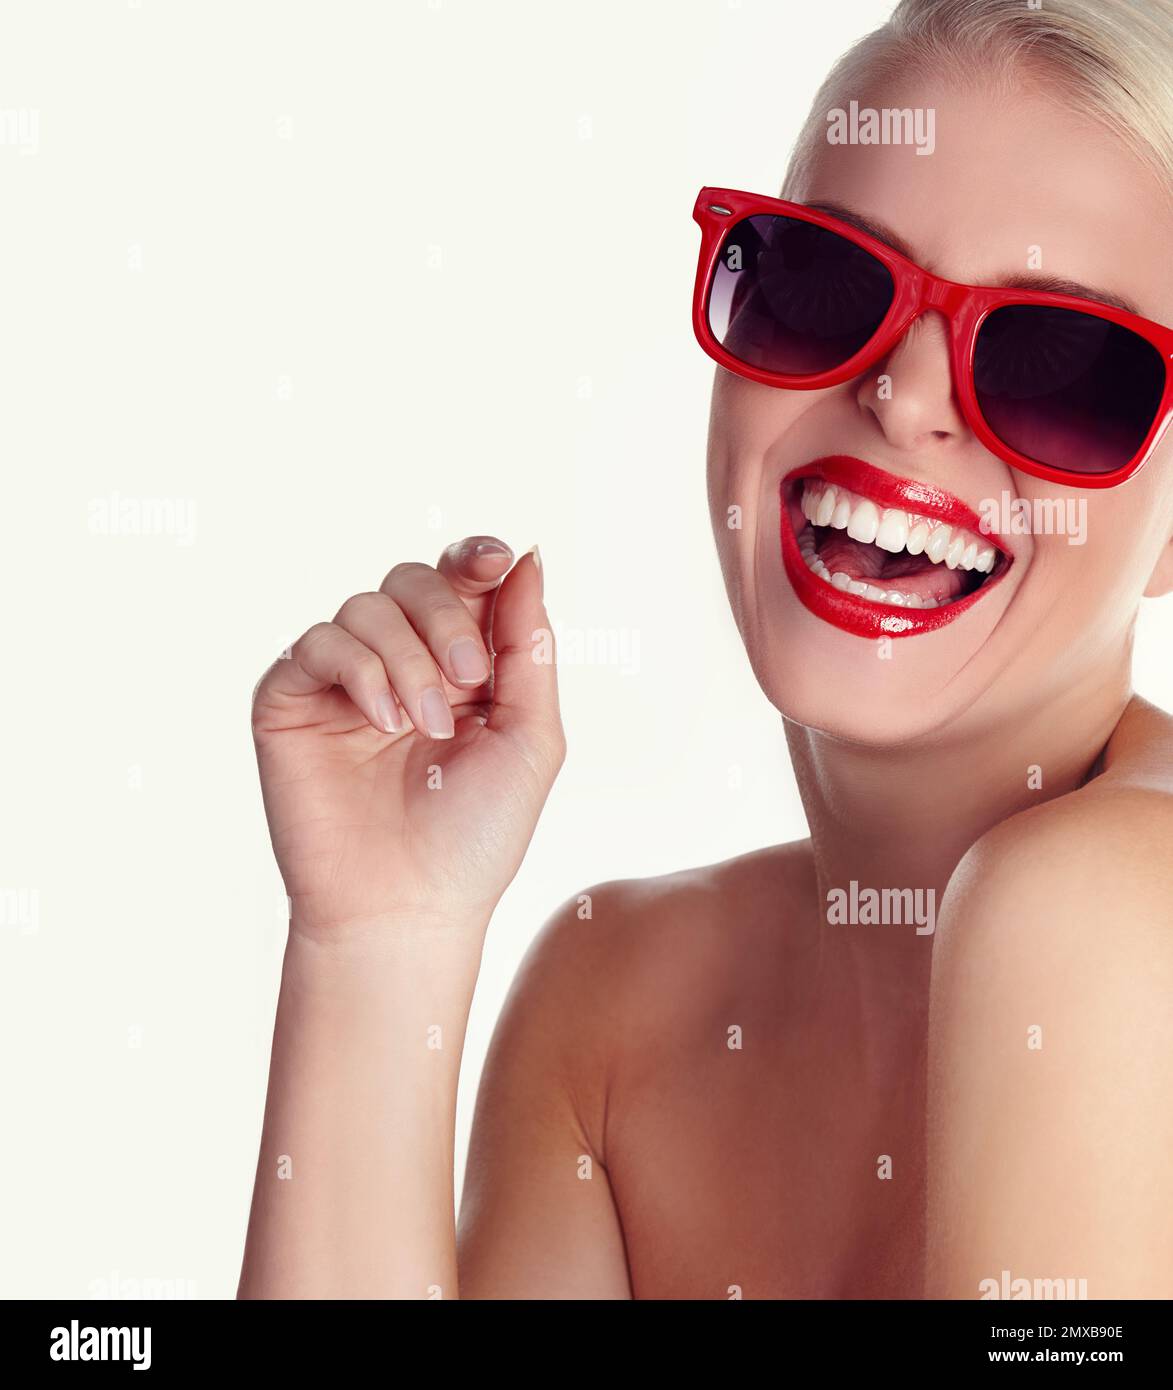 Showing off a Hollywood smile. A laughing blonde wearing red sunglasses against an isolated background. Stock Photo